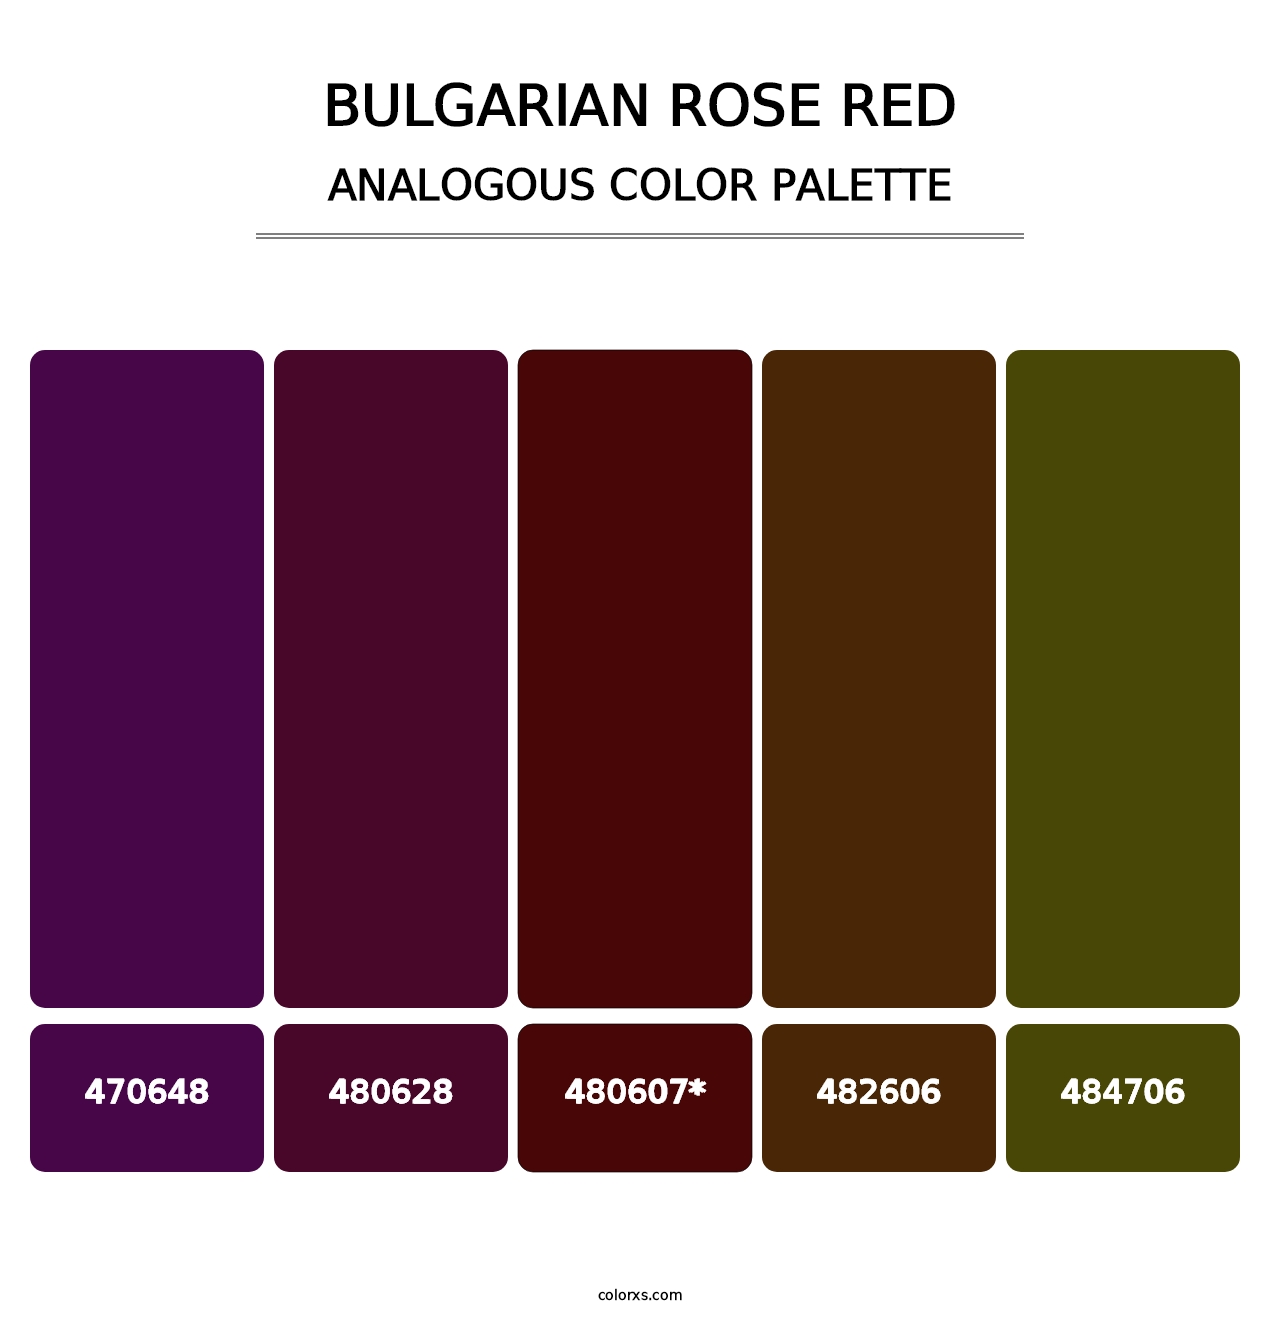 Bulgarian Rose Red - Analogous Color Palette